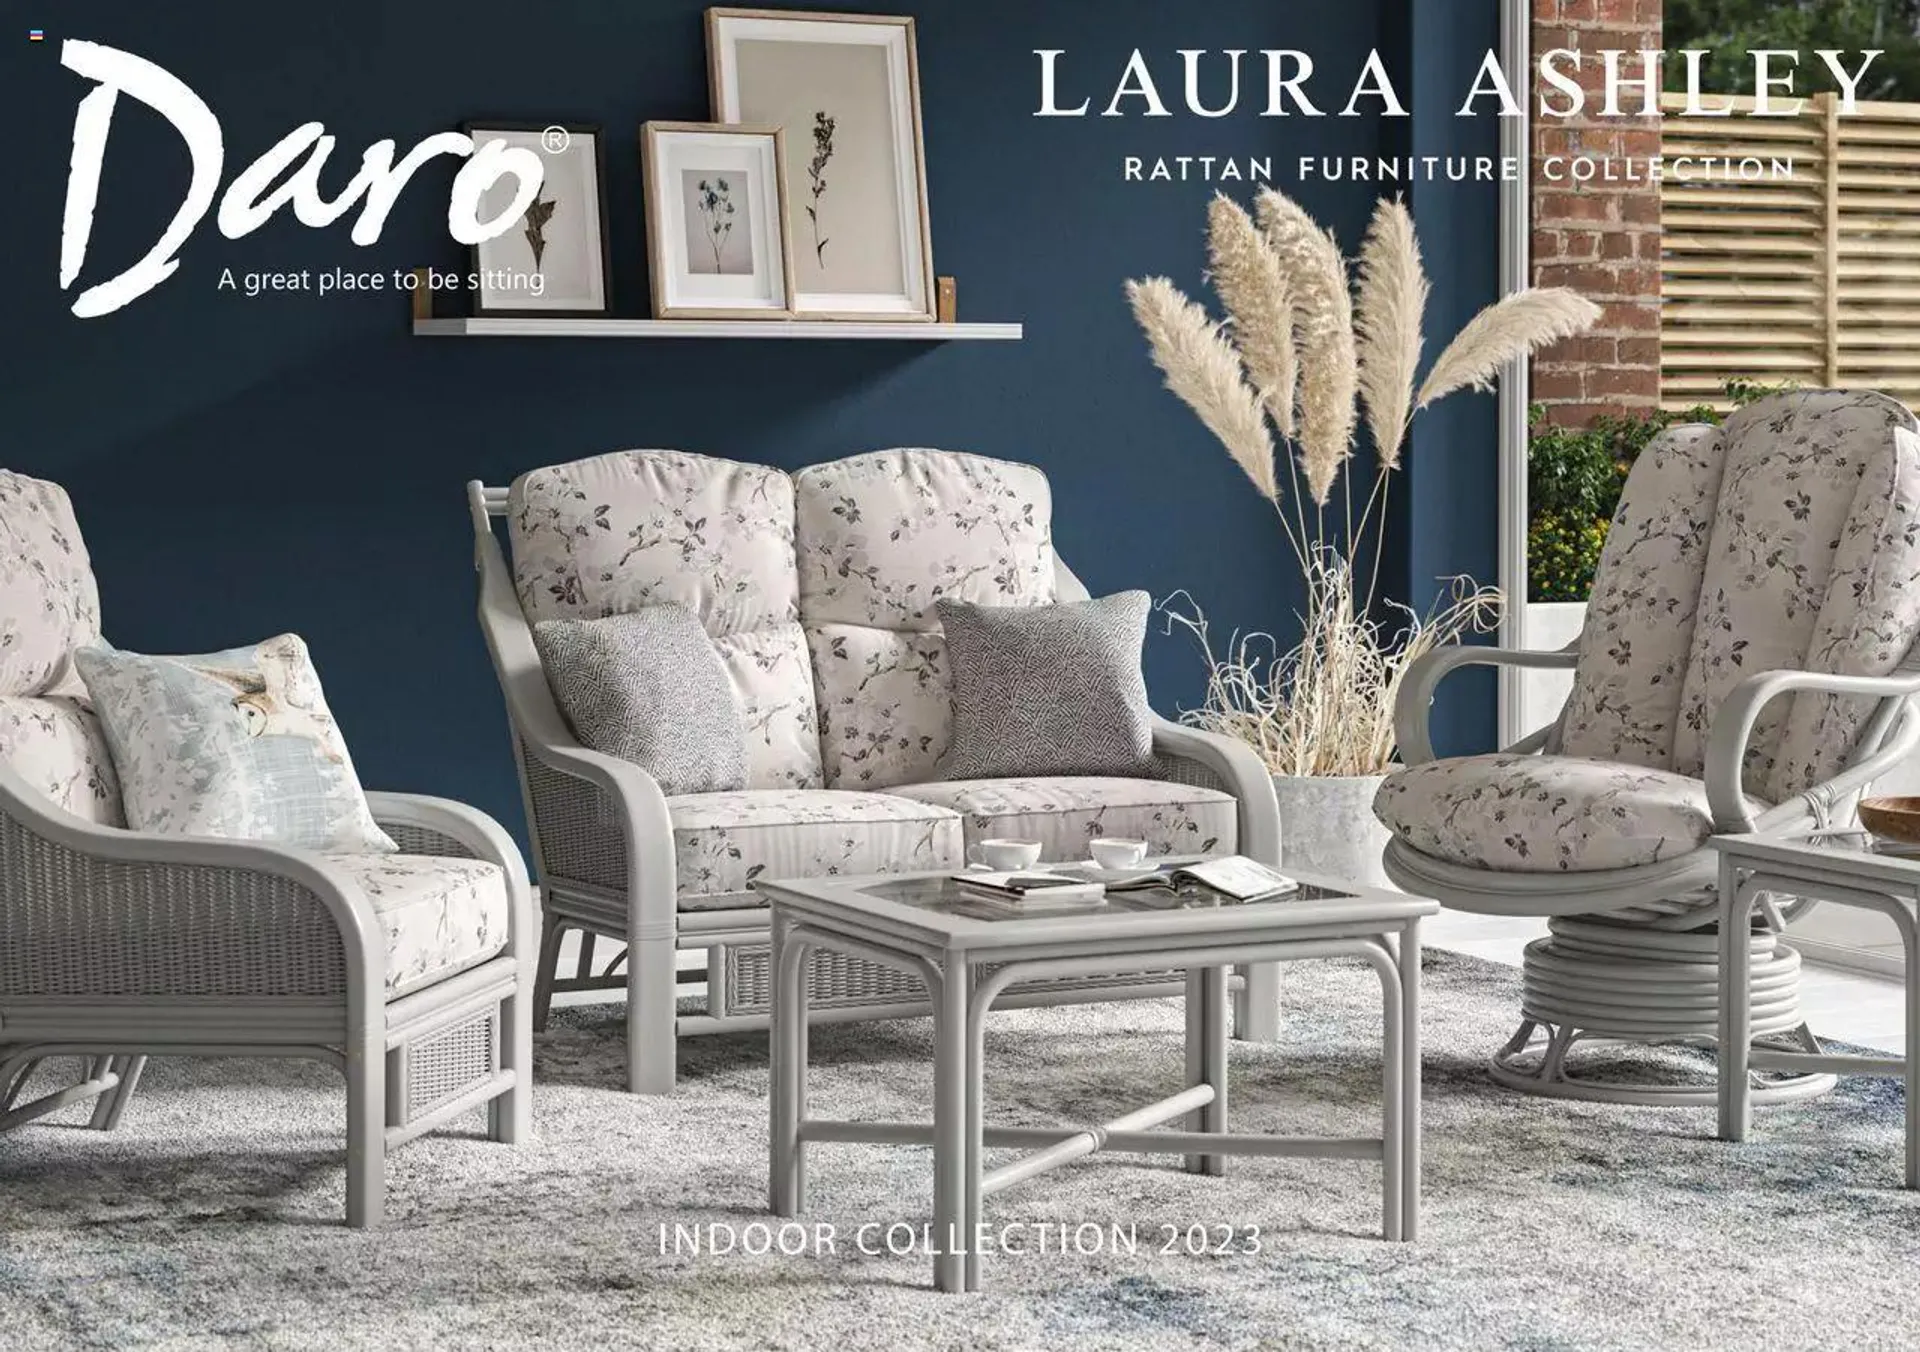 Laura Ashley - Daro & Laura Ashley Indoor Collection 2023 from 12 March to 18 January 2024 - Catalogue Page 